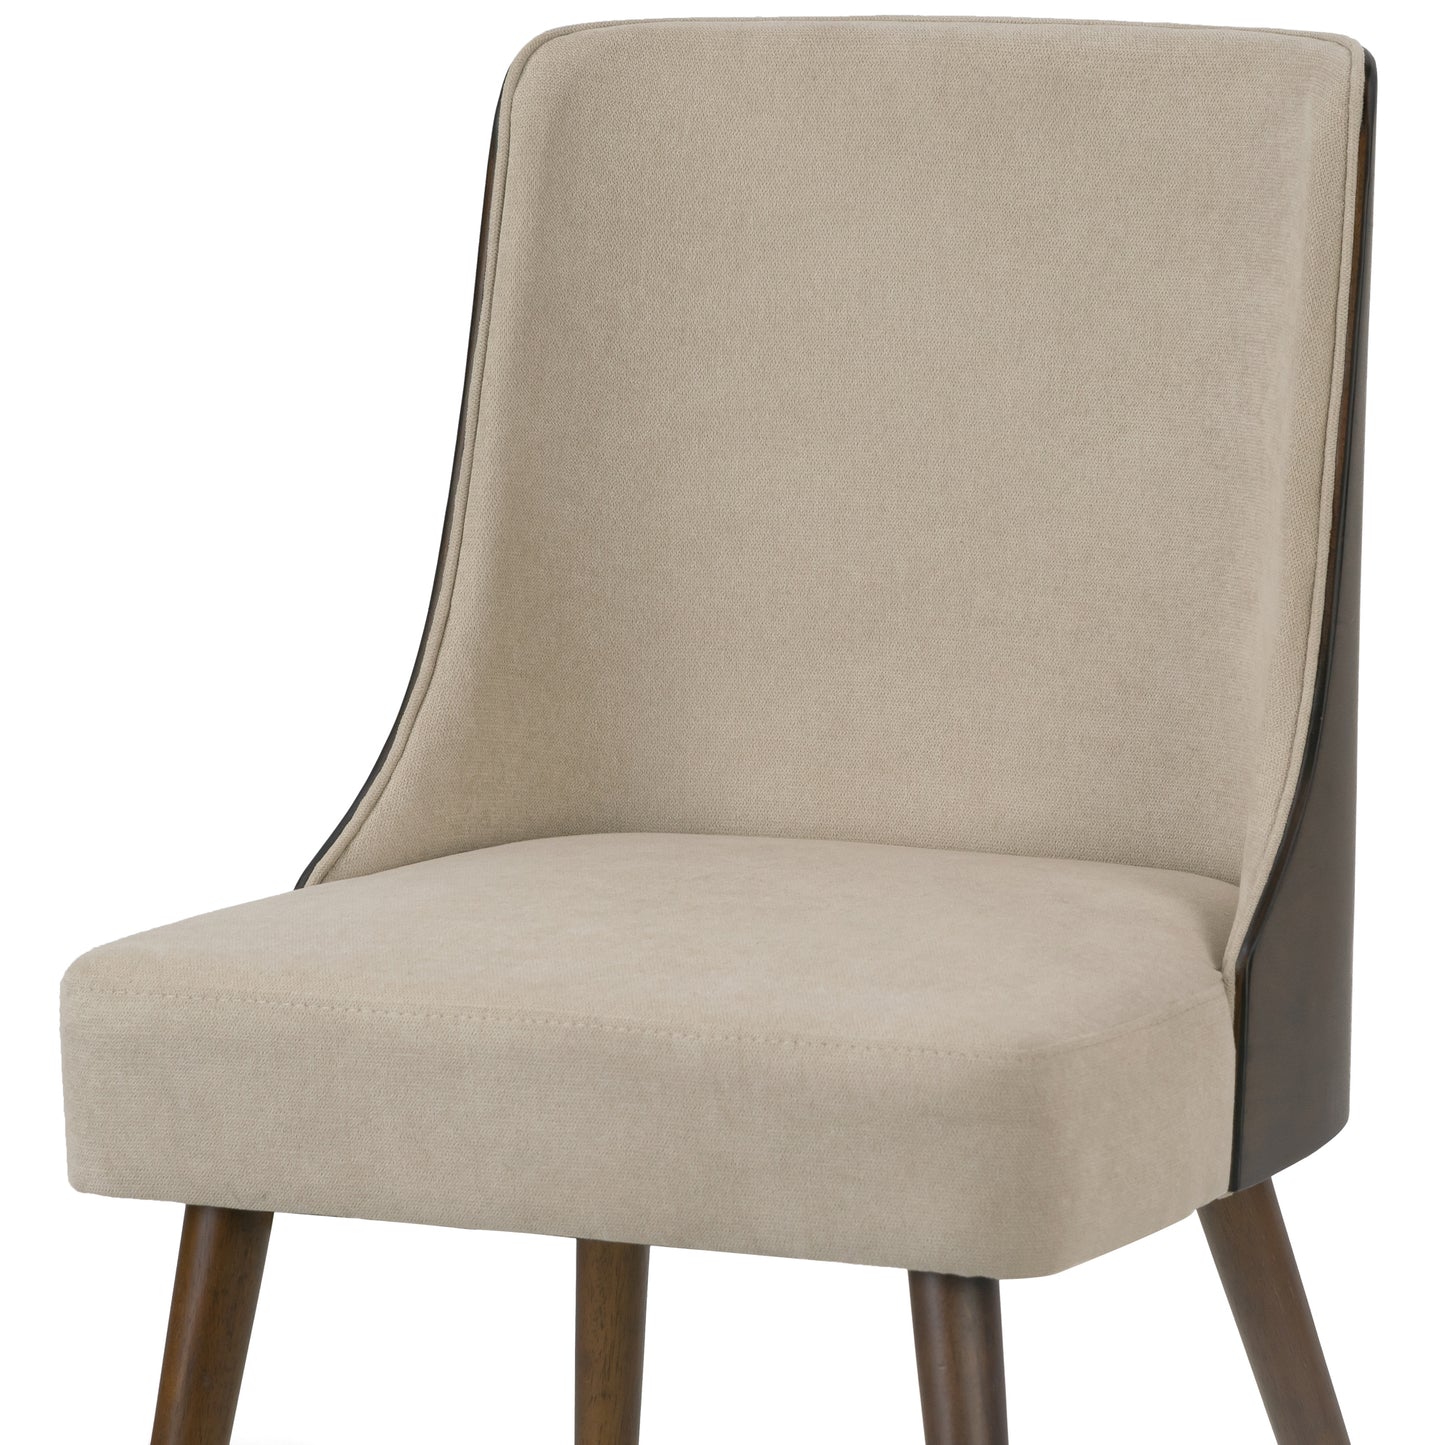 Set of 2 Asma Beige Fabric Chair with Dark Brown Bentwood Back and Solid Wood Legs